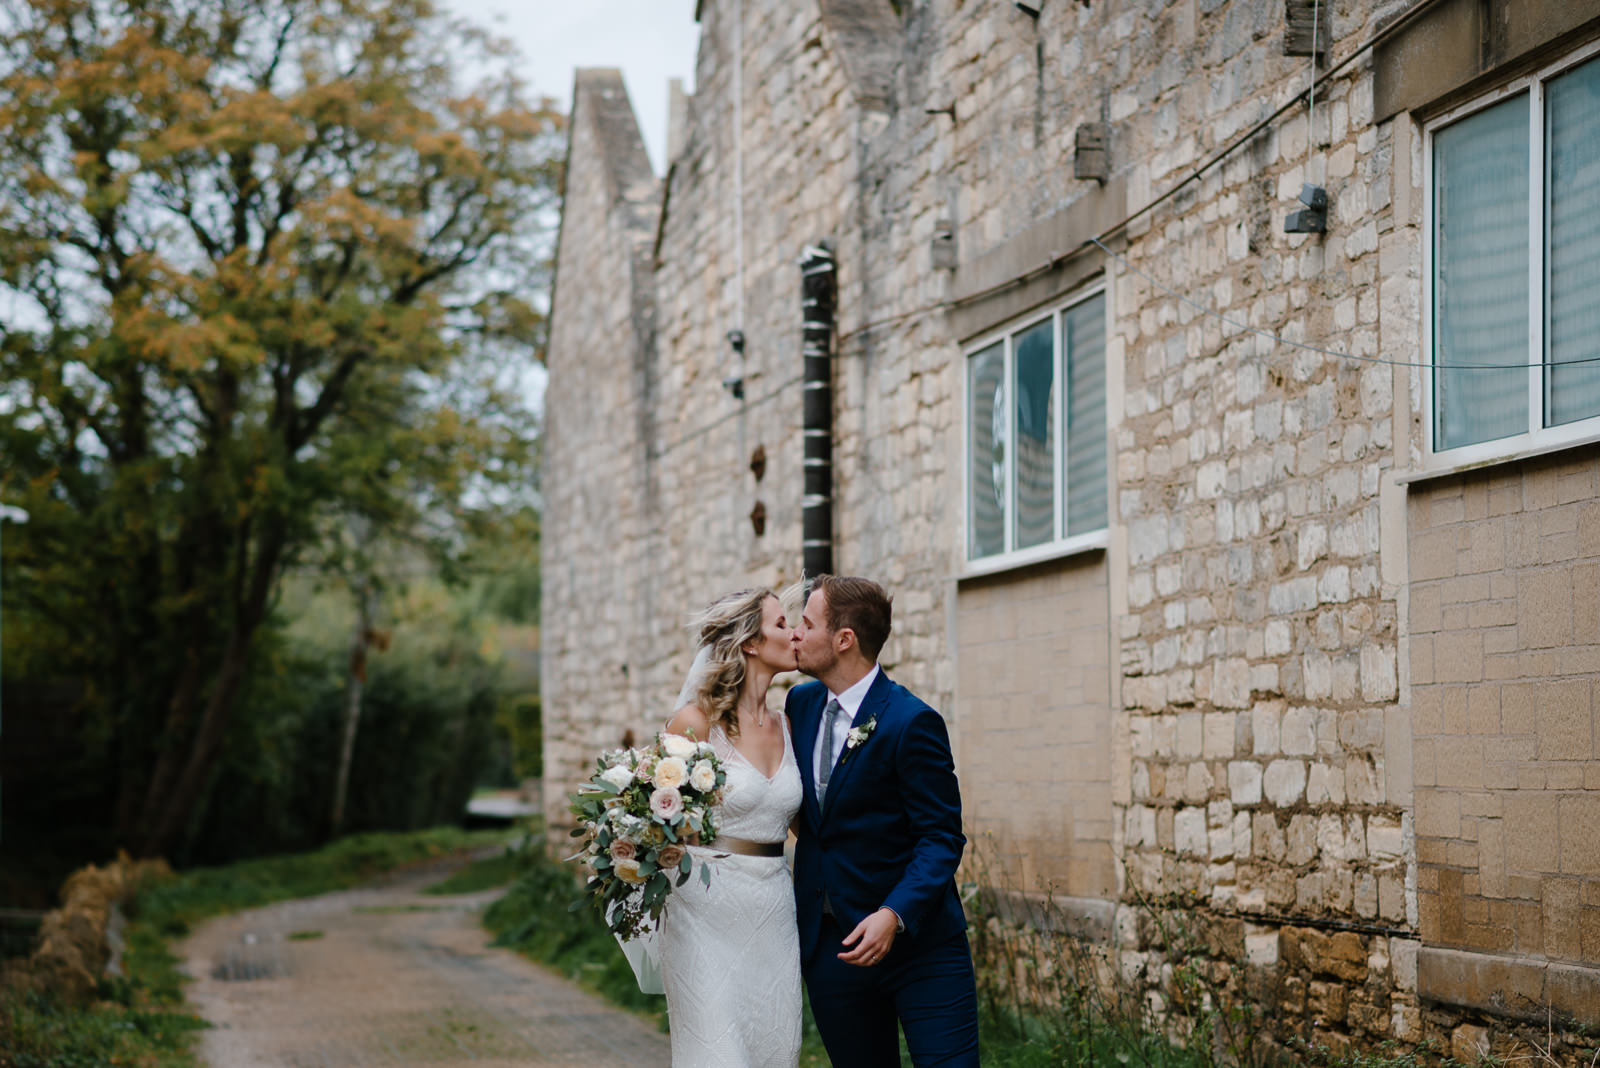 Modern Glove Factory Studios Wedding, Wiltshire // Vicky & Andy